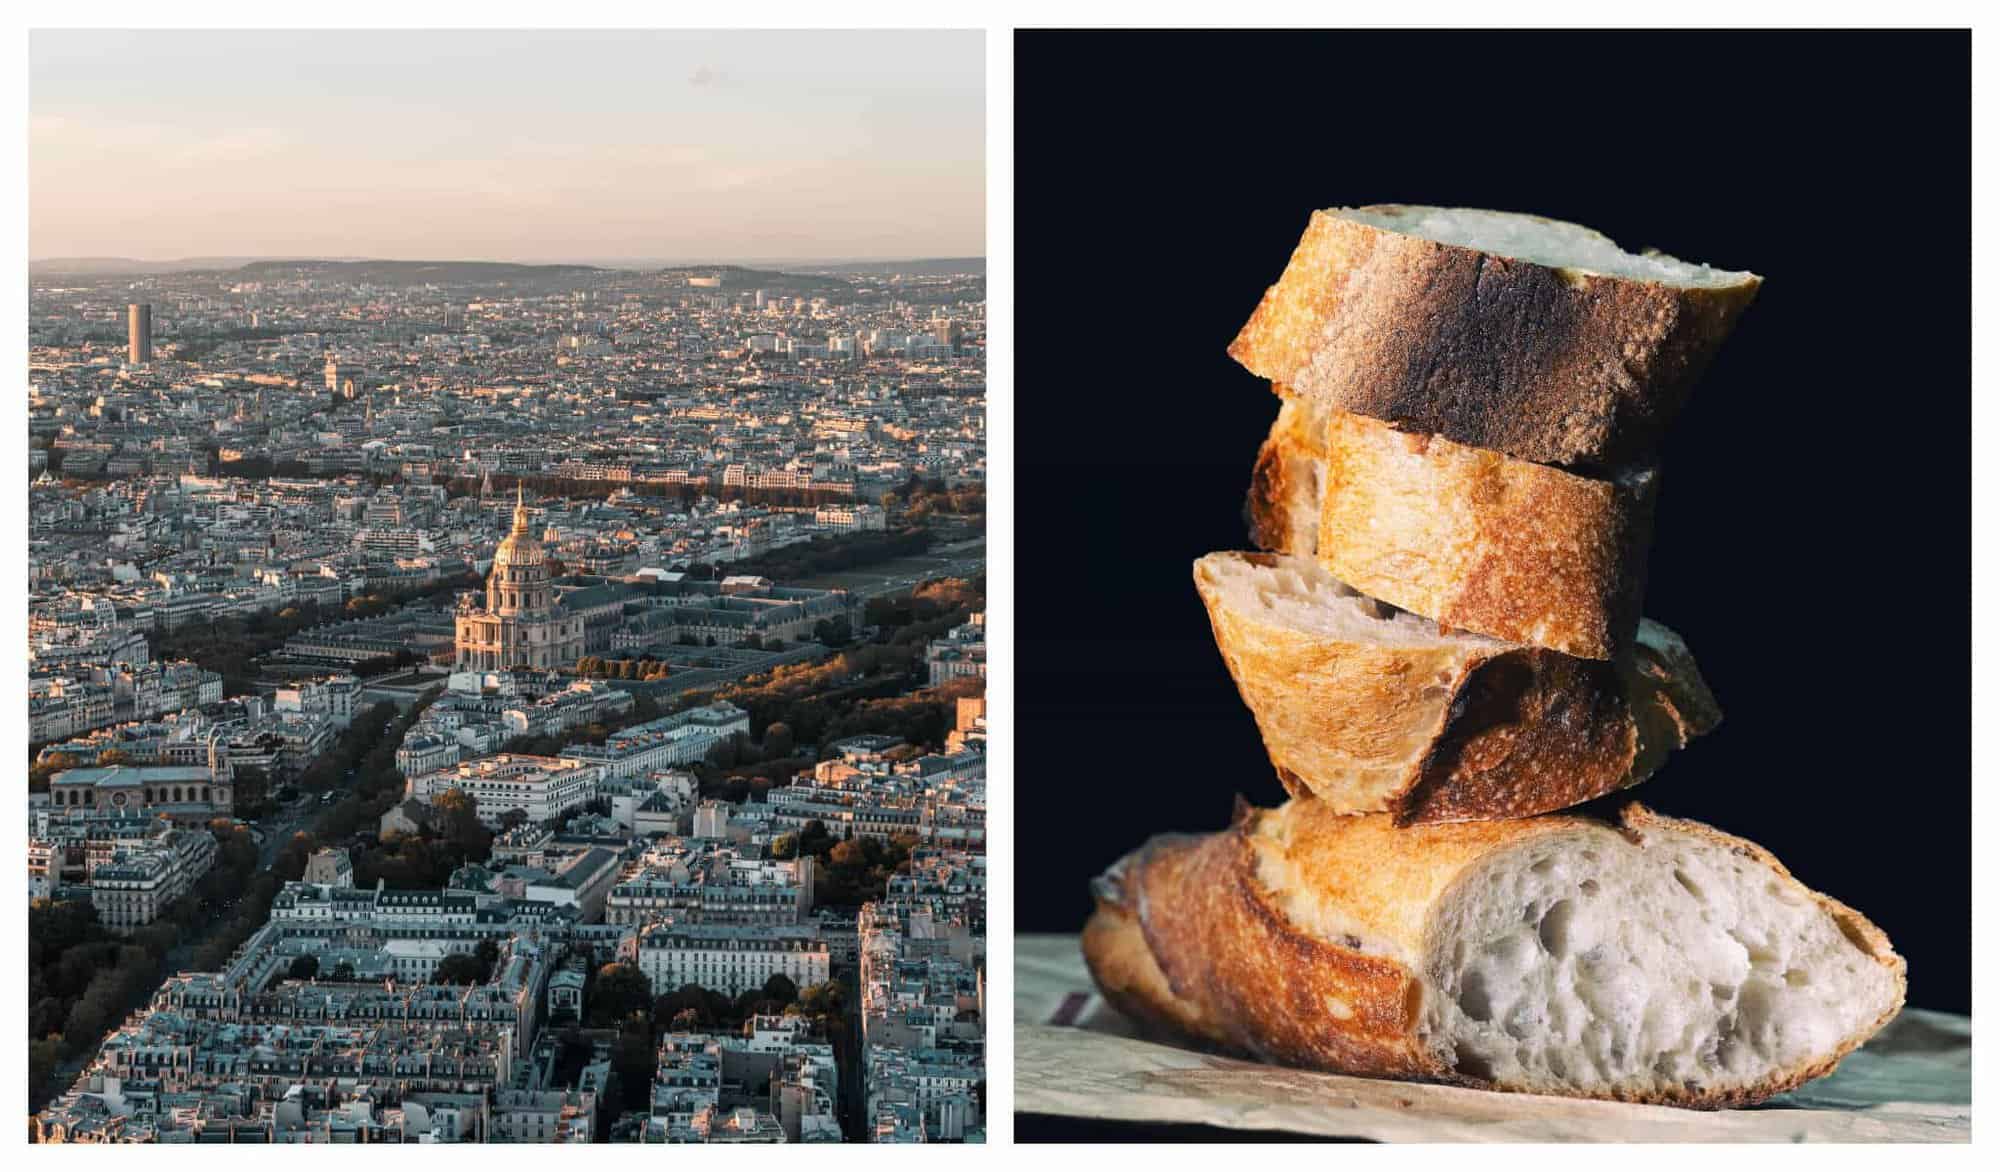 Left: Paris' Les Invalides golden dome shines during sunset beside Paris concrete buildings; Right: 3 sliced parts of a baguette are stacked on each other with the remaining half on the very bottom.